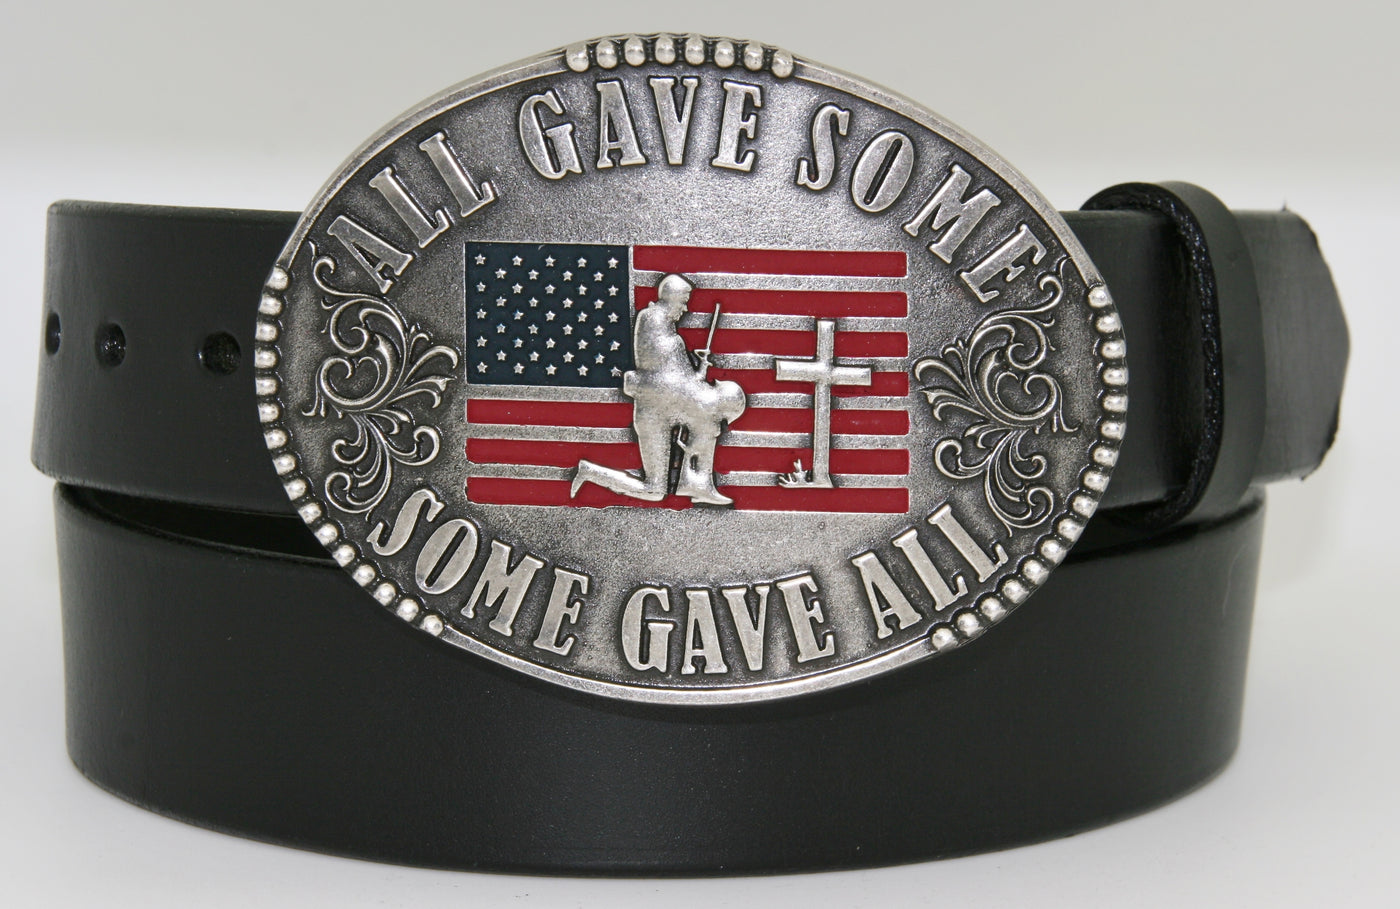 All Gave Some Some Gave All Buckle oval plate style belt buckle with American Flag inlay under kneeling soldier and cross. All Gave Some, Some Gave All imprinted around edges of buckle and scroll design on either side of wording. Available in our shop just outside Nashville in Smyrna, TN as well as on this website.  Made by AndWest in Mexico. Dimensions are 3 1/4" by 4 1/4", pictured on sturdy black leather belt, also available from this shop.